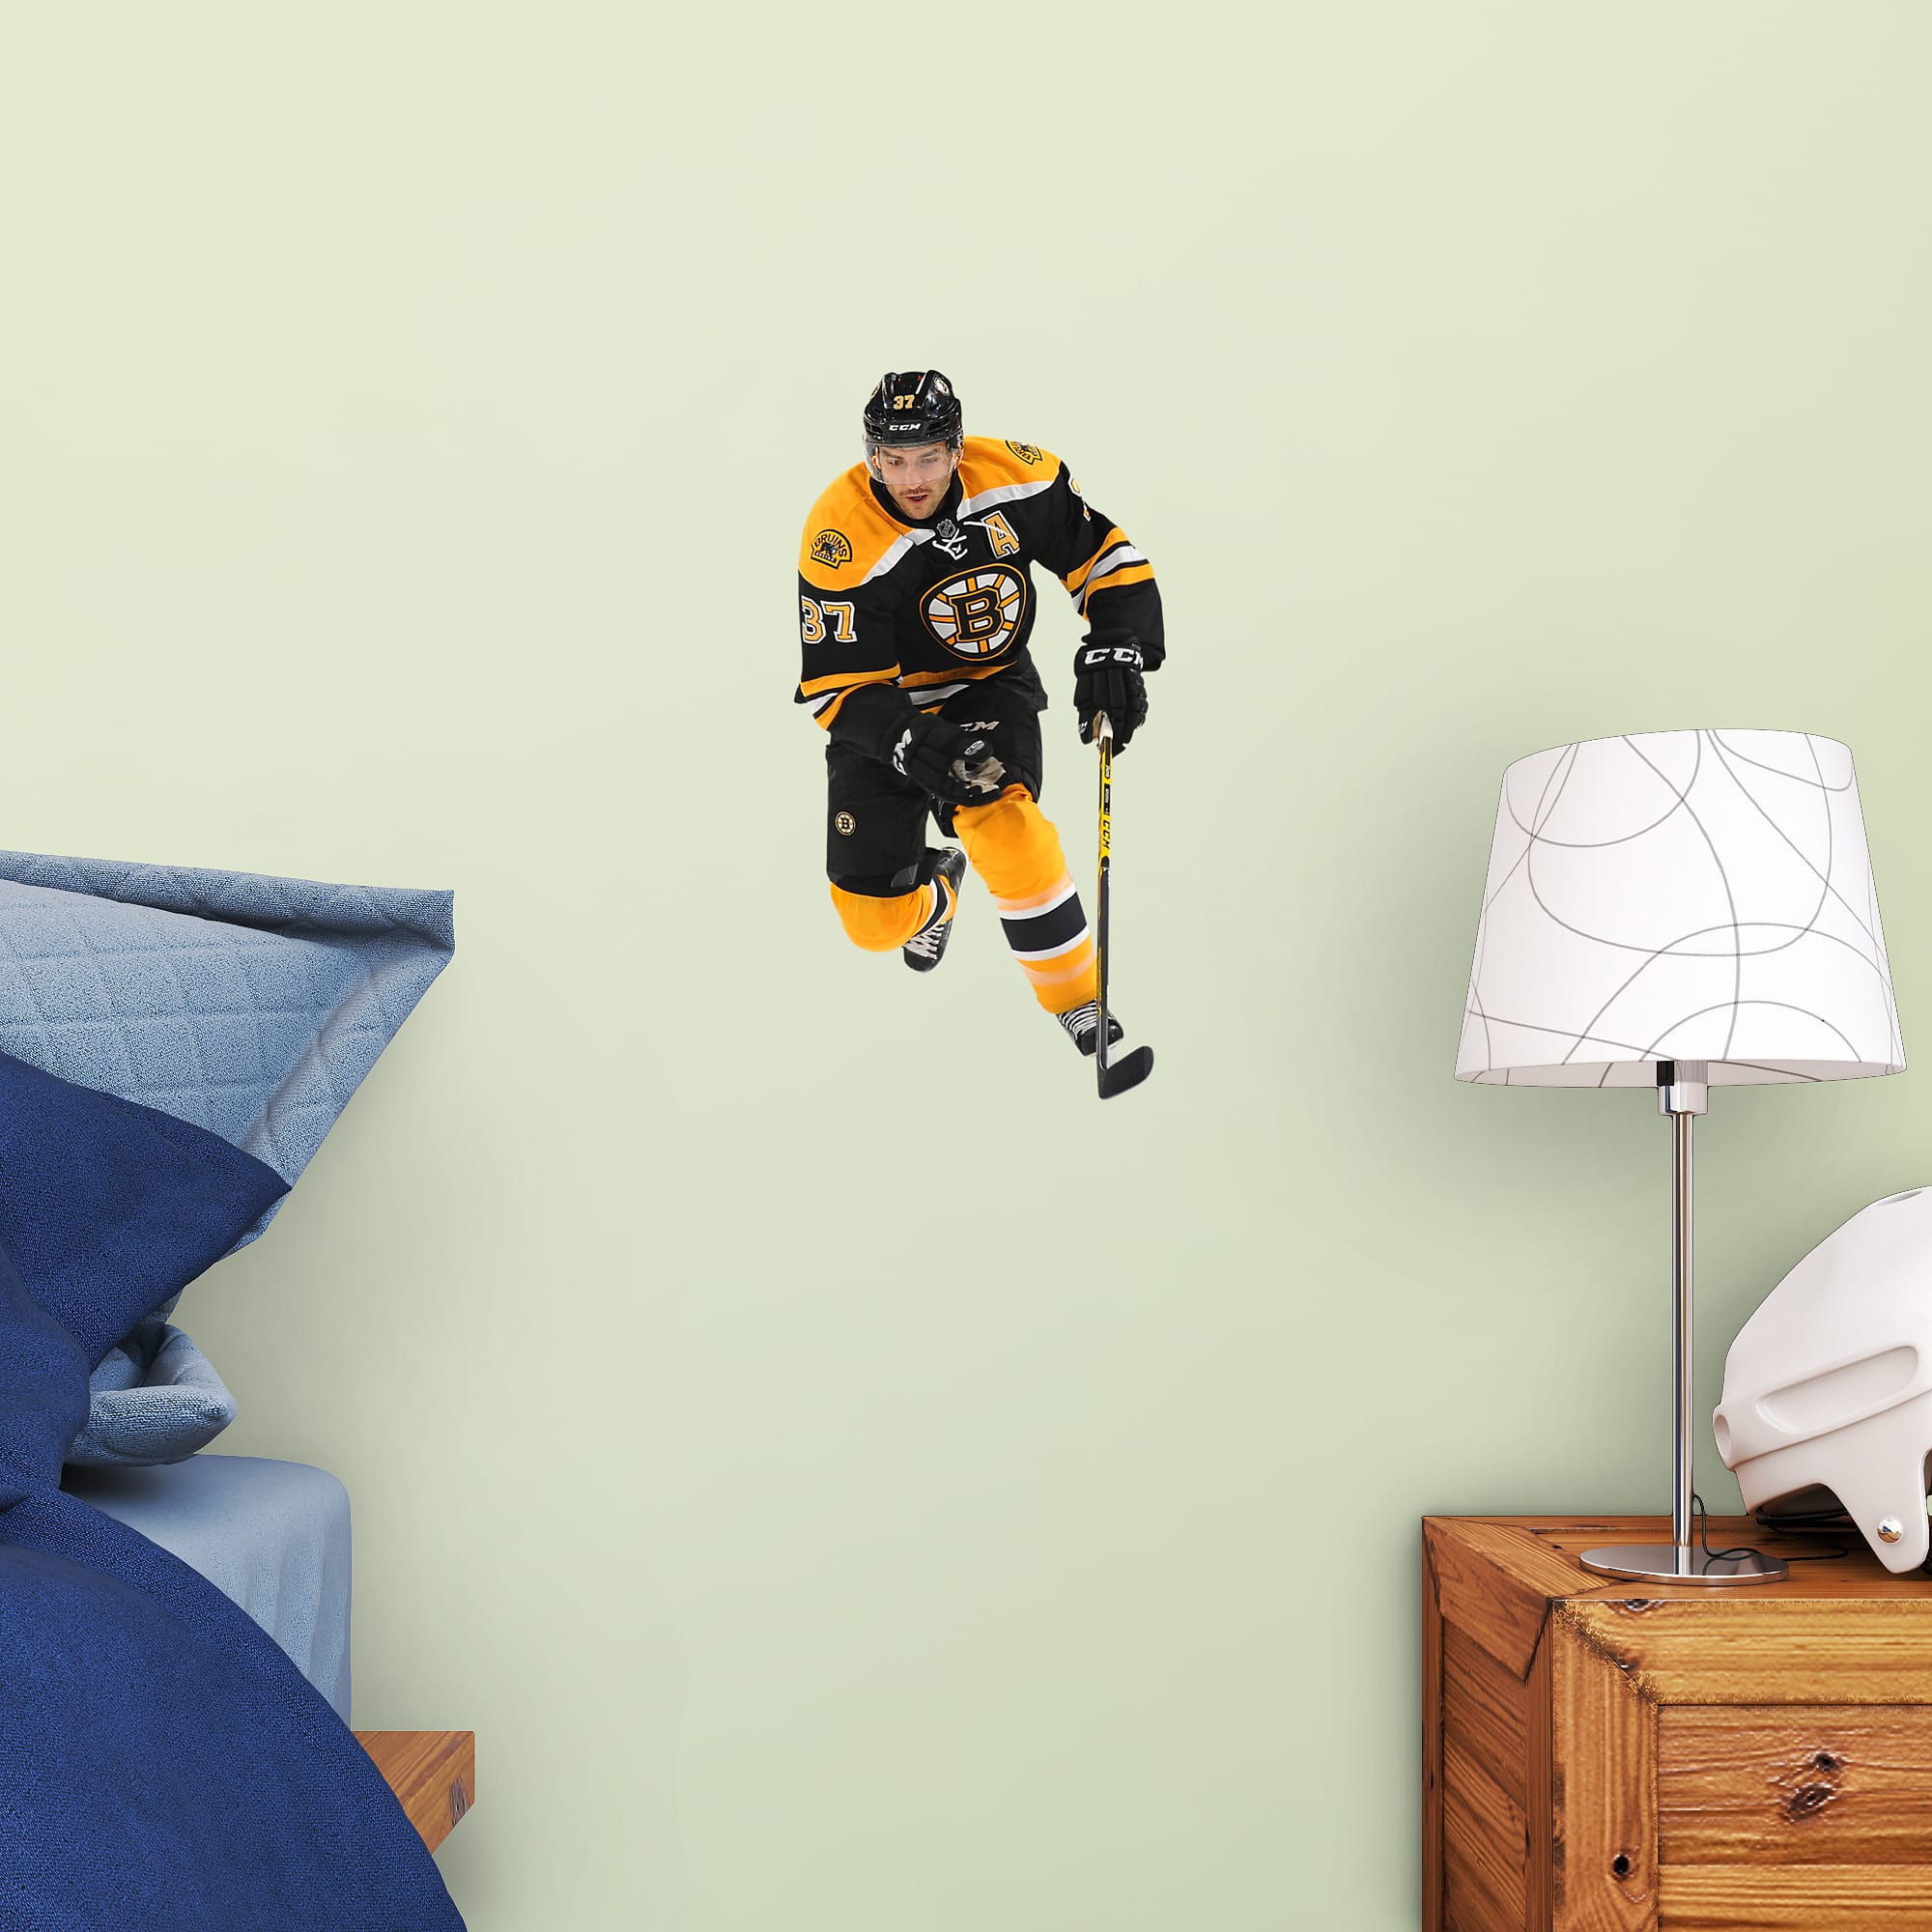 Patrice Bergeron for Boston Bruins - Officially Licensed NHL Removable Wall Decal 8.0"W x 16.5"H by Fathead | Vinyl